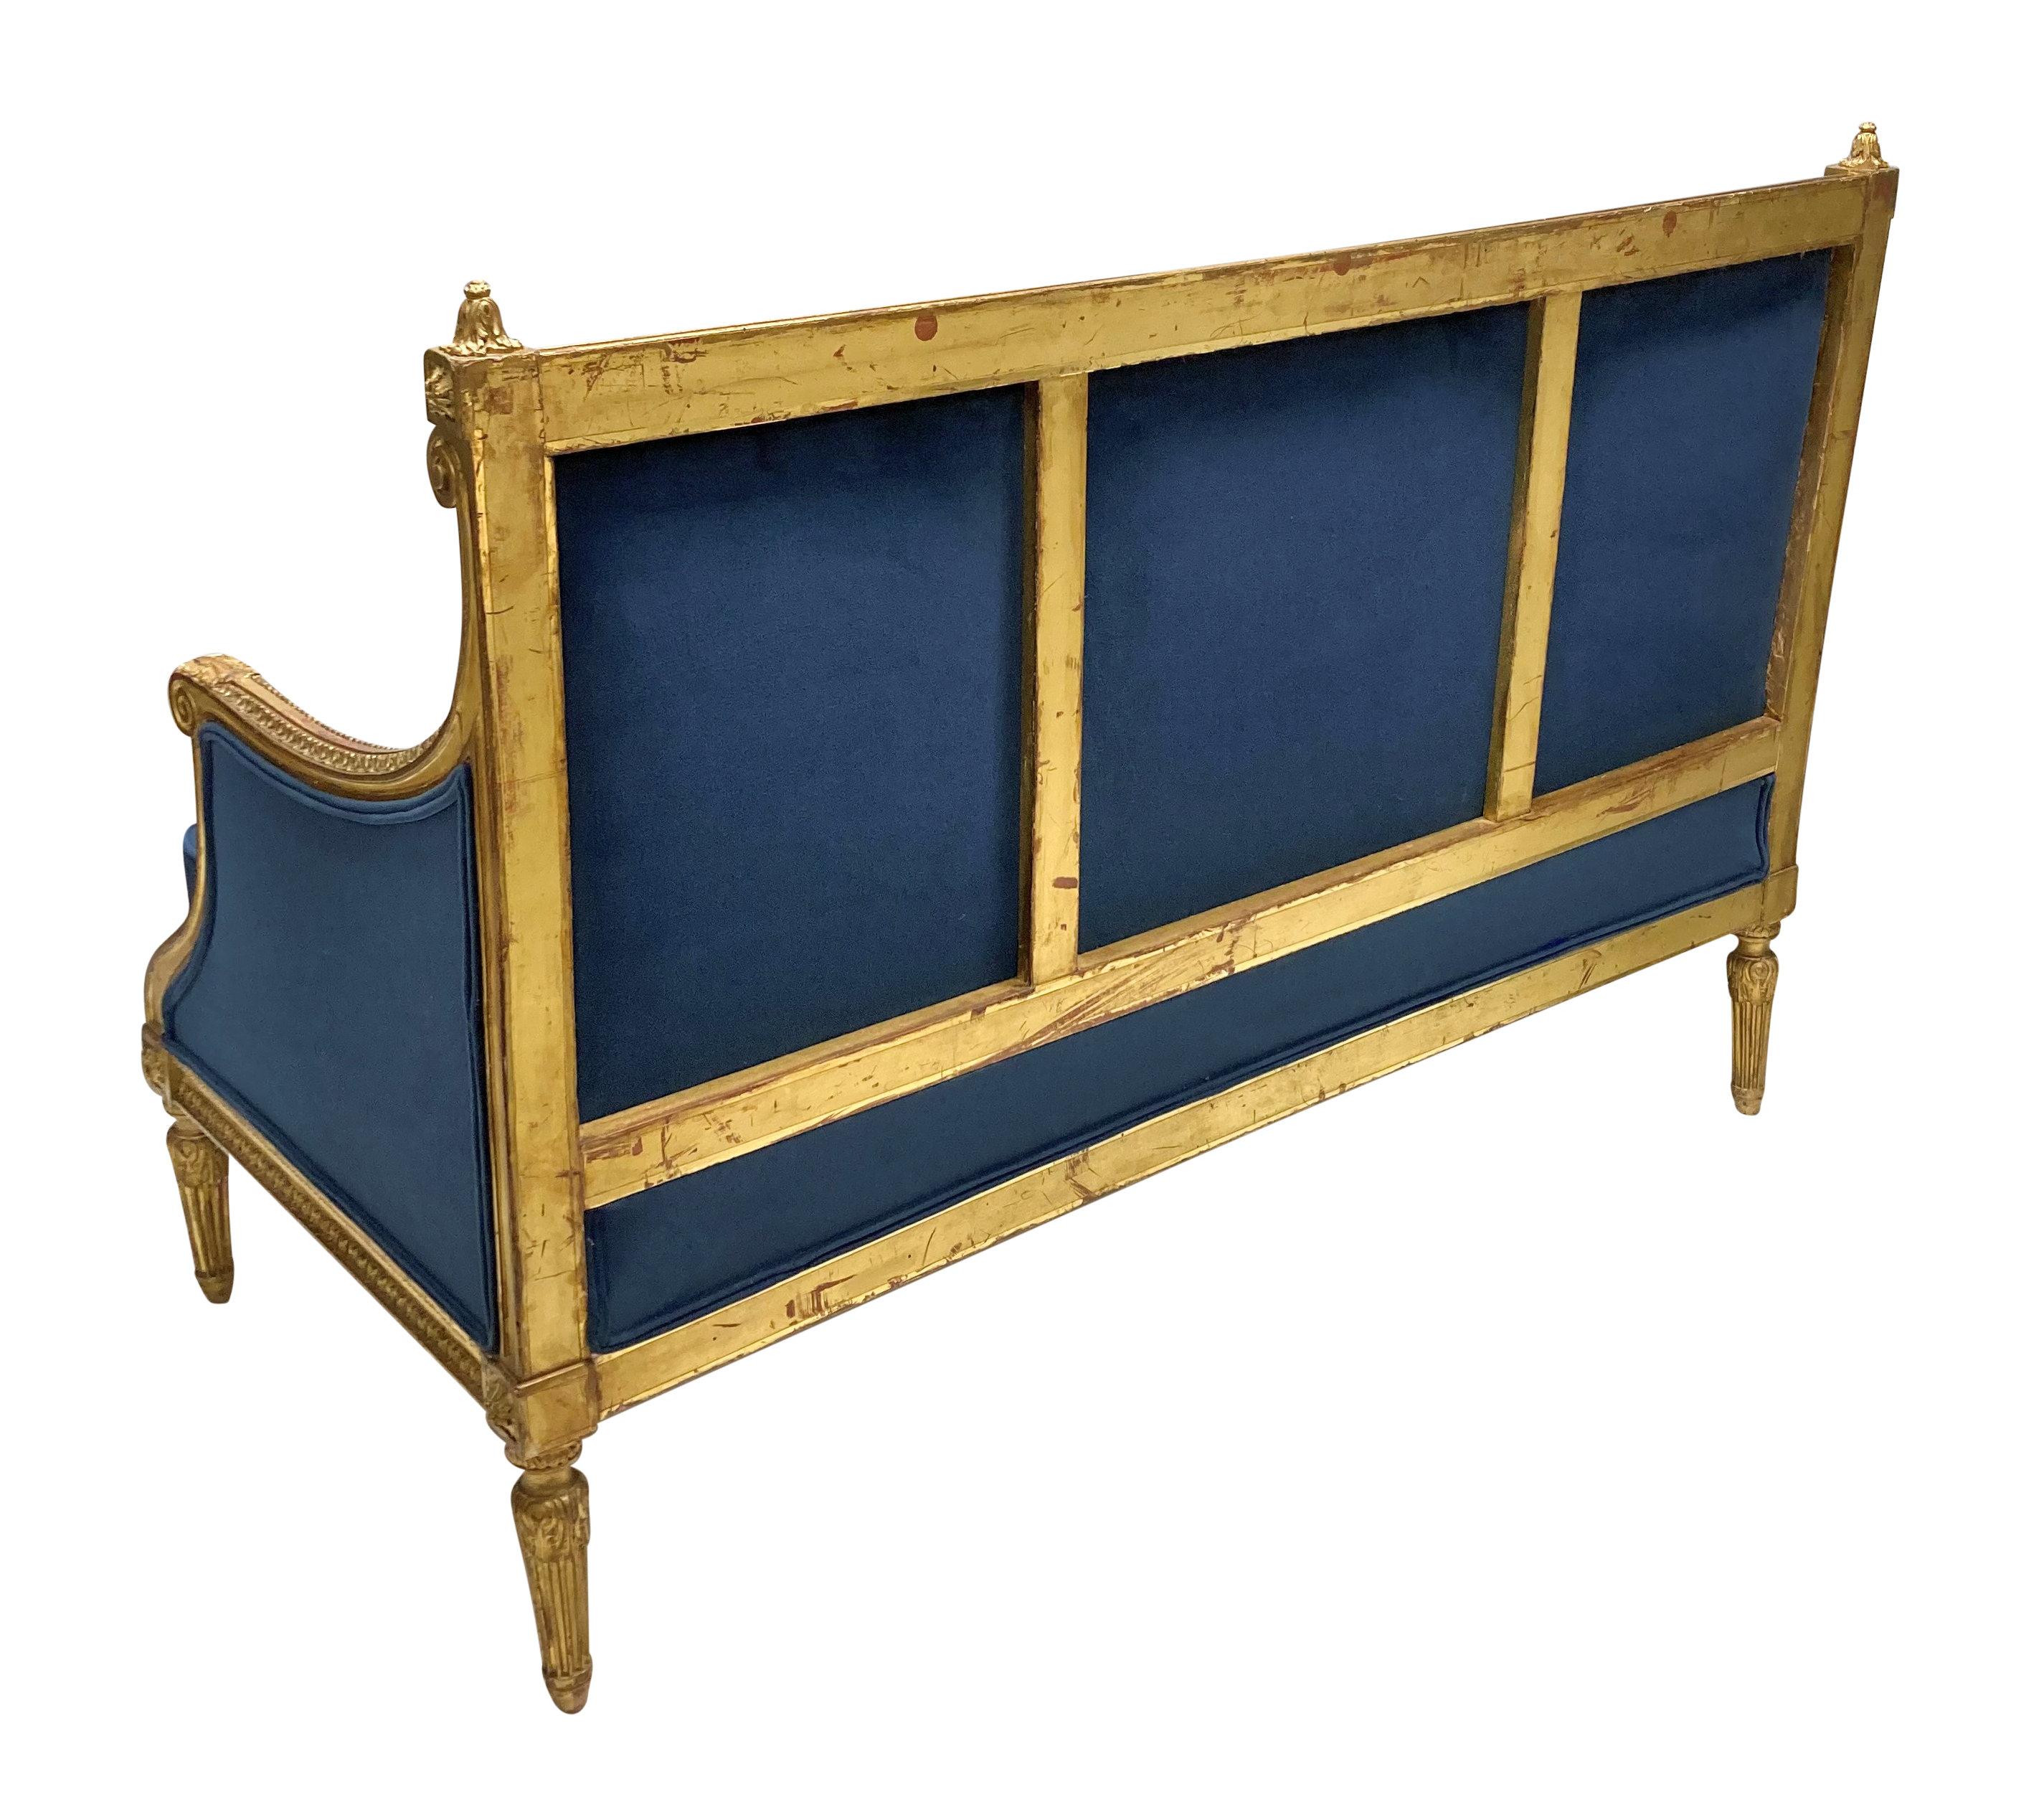 French Louis XVI Style Giltwood Settee In Blue Velvet For Sale 3